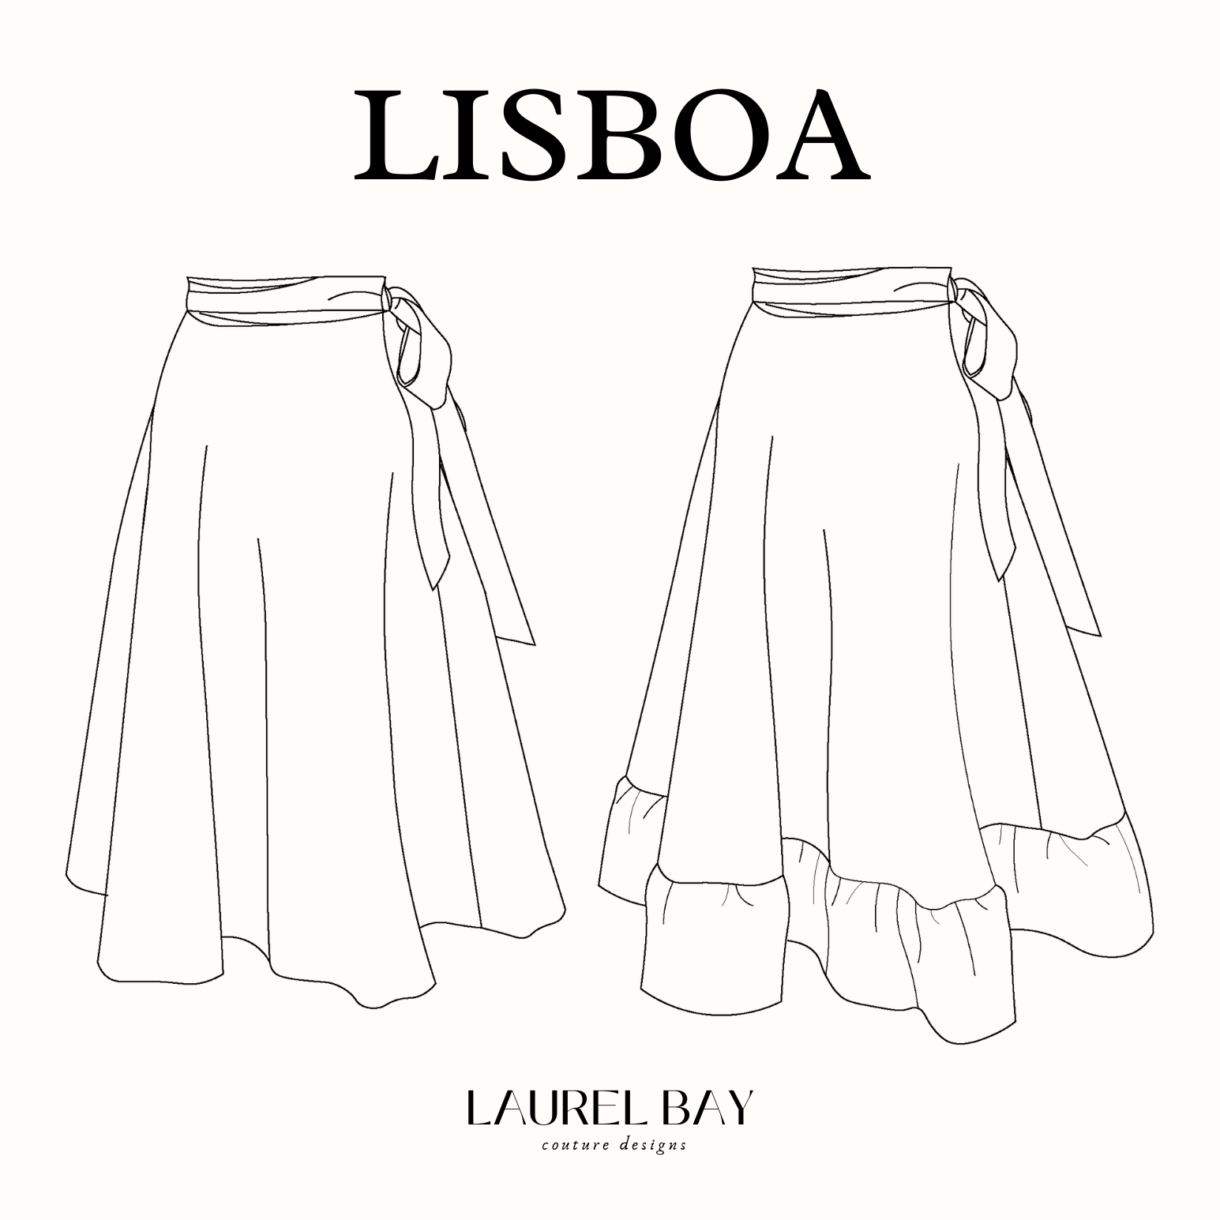 simple outline sketch of the LISBOA wrap skirt sewing pattern showing the ruffle version and the regular version